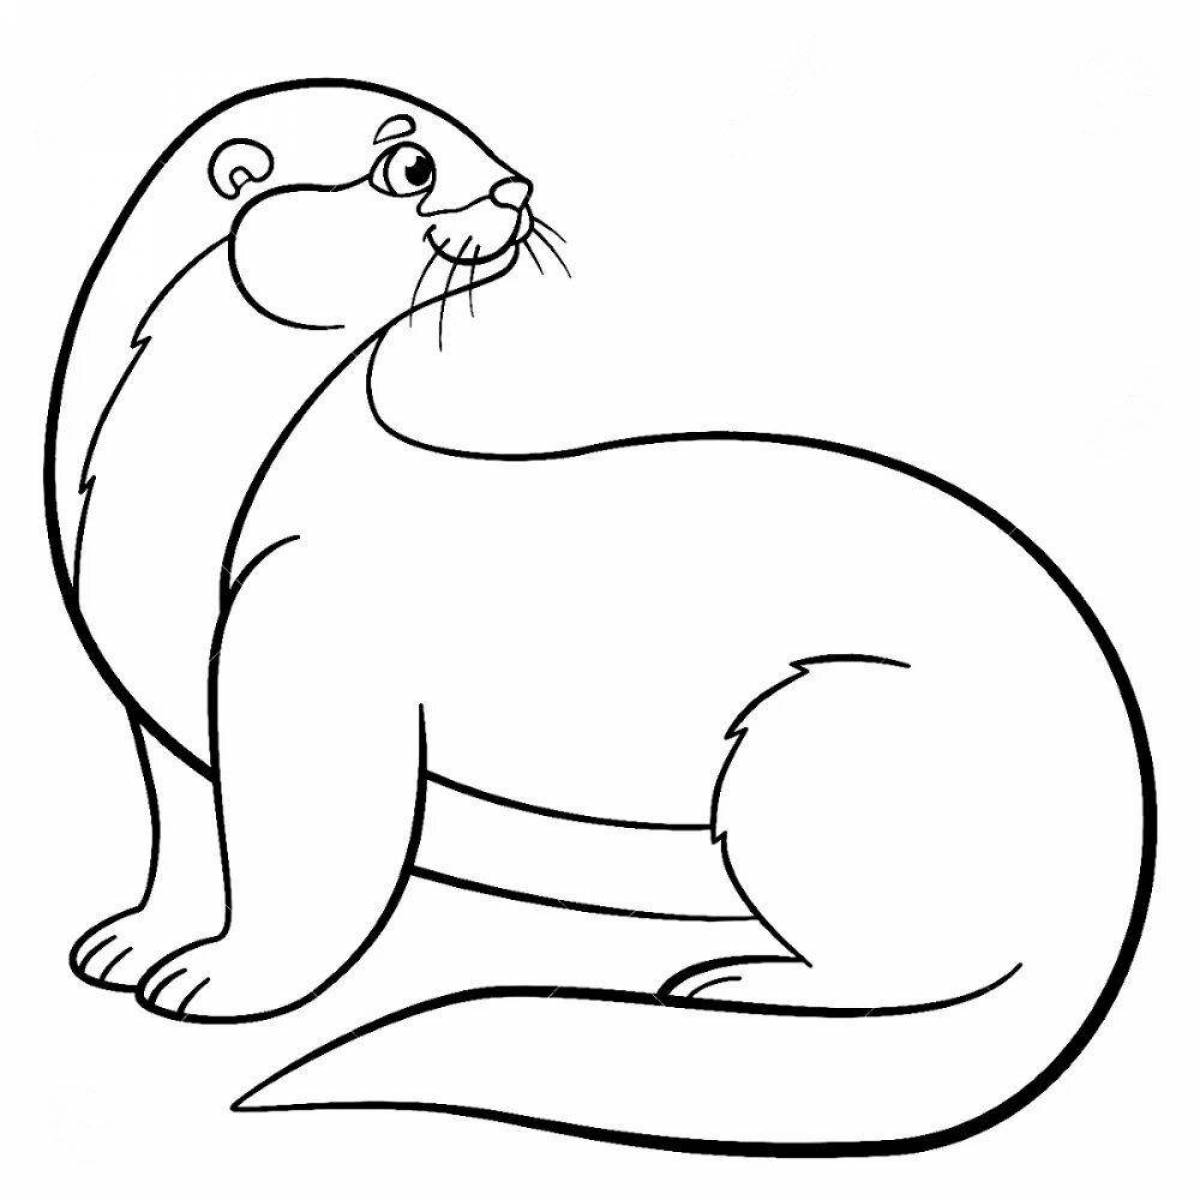 Animated river otter coloring page